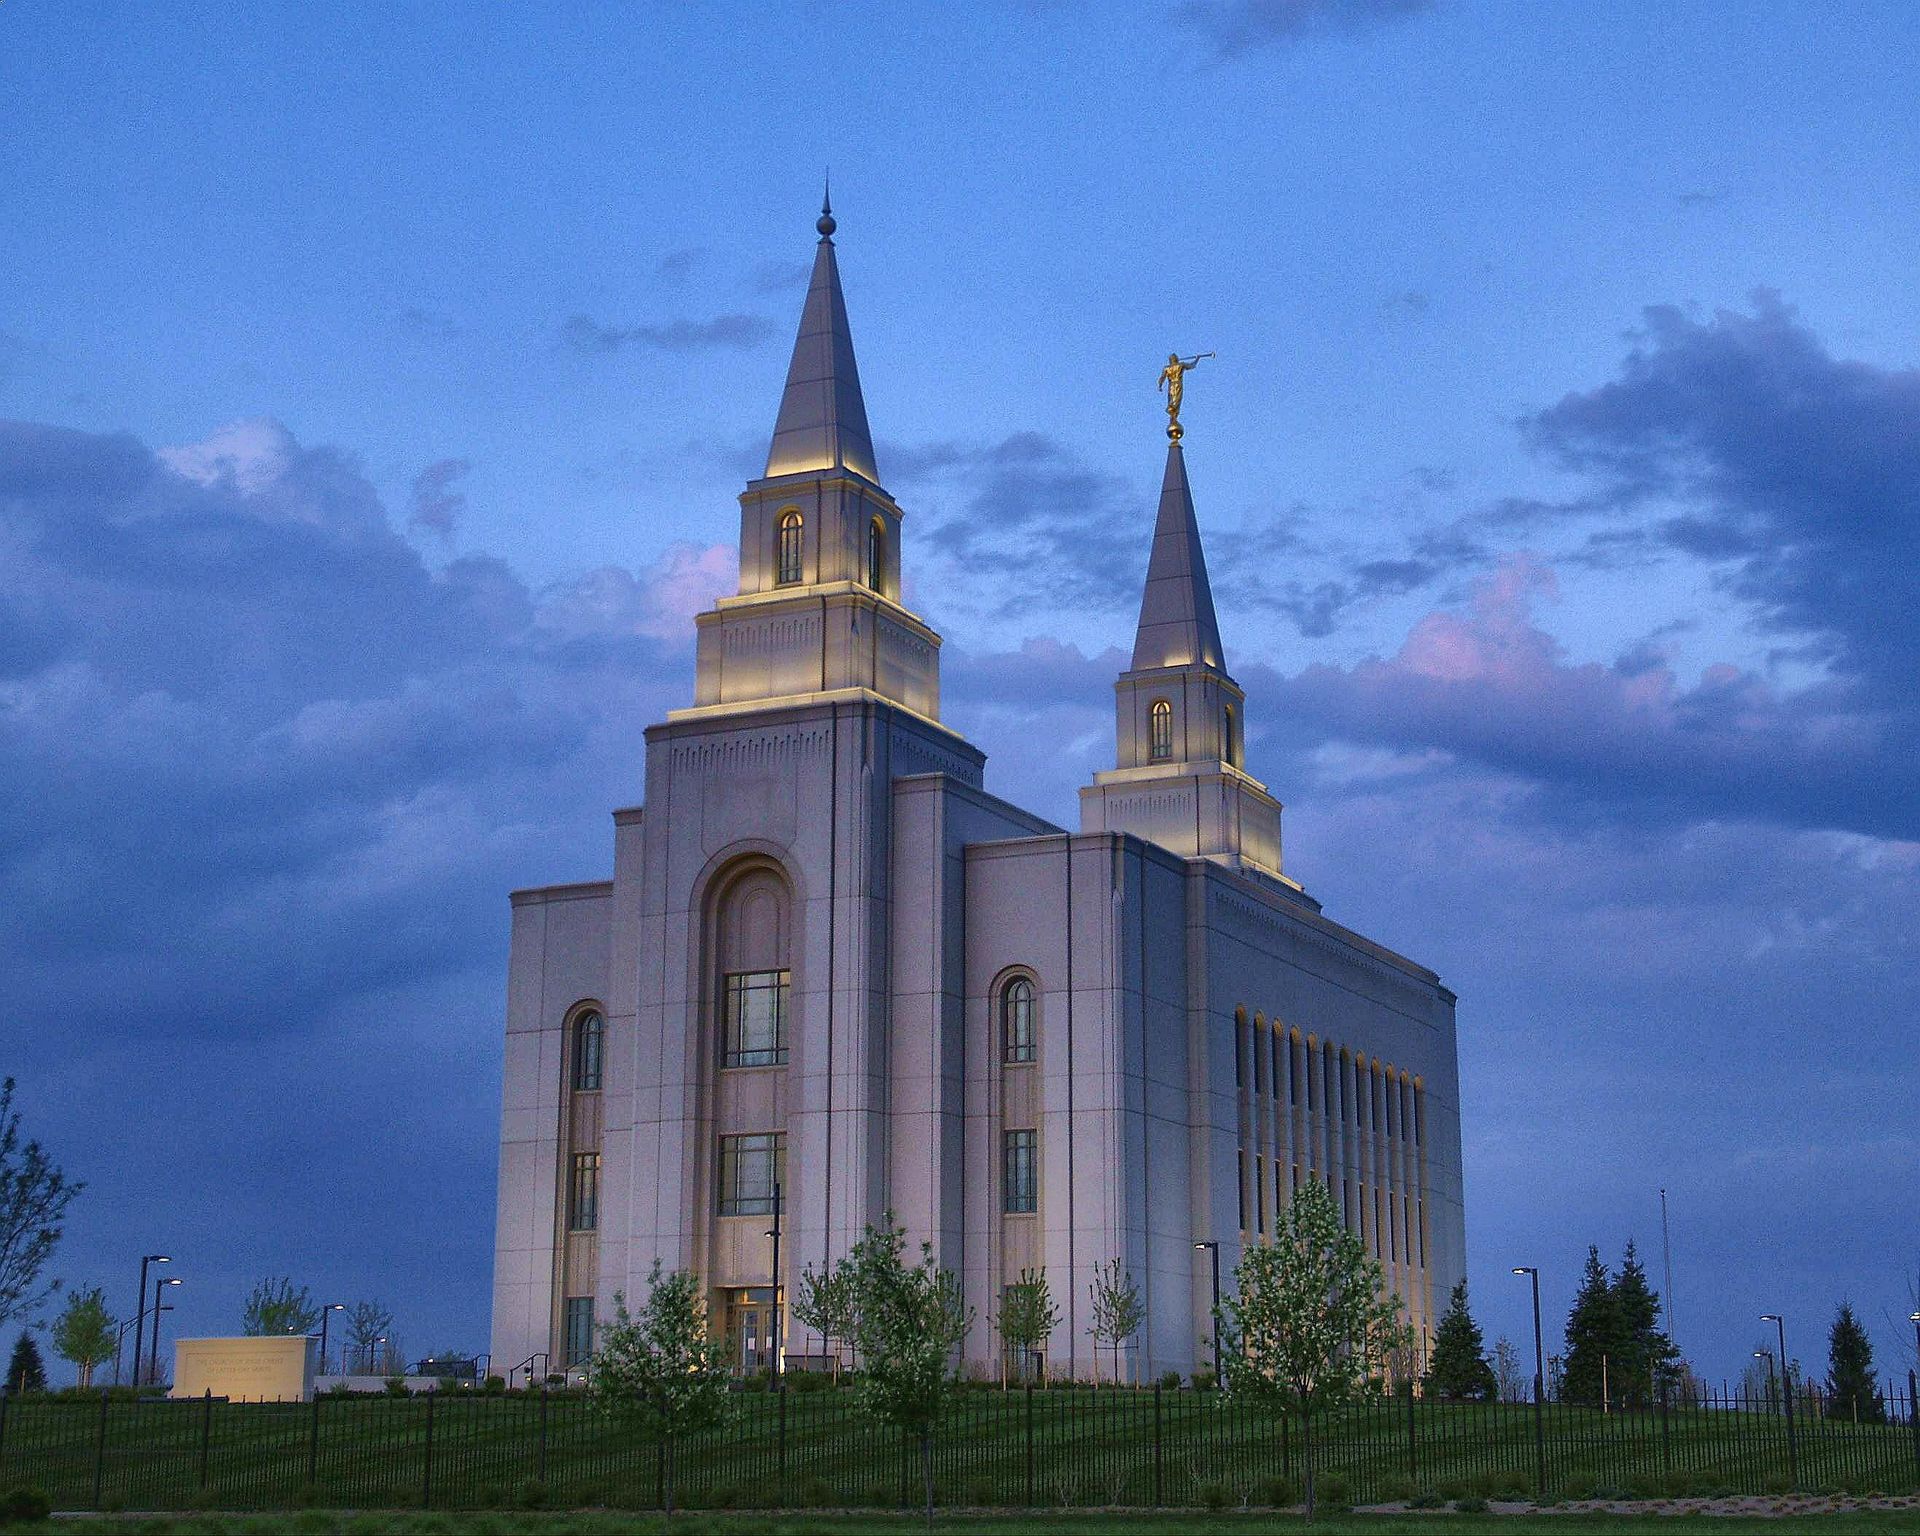 An exterior view of the Kansas City Missouri Temple right after the sun sets.